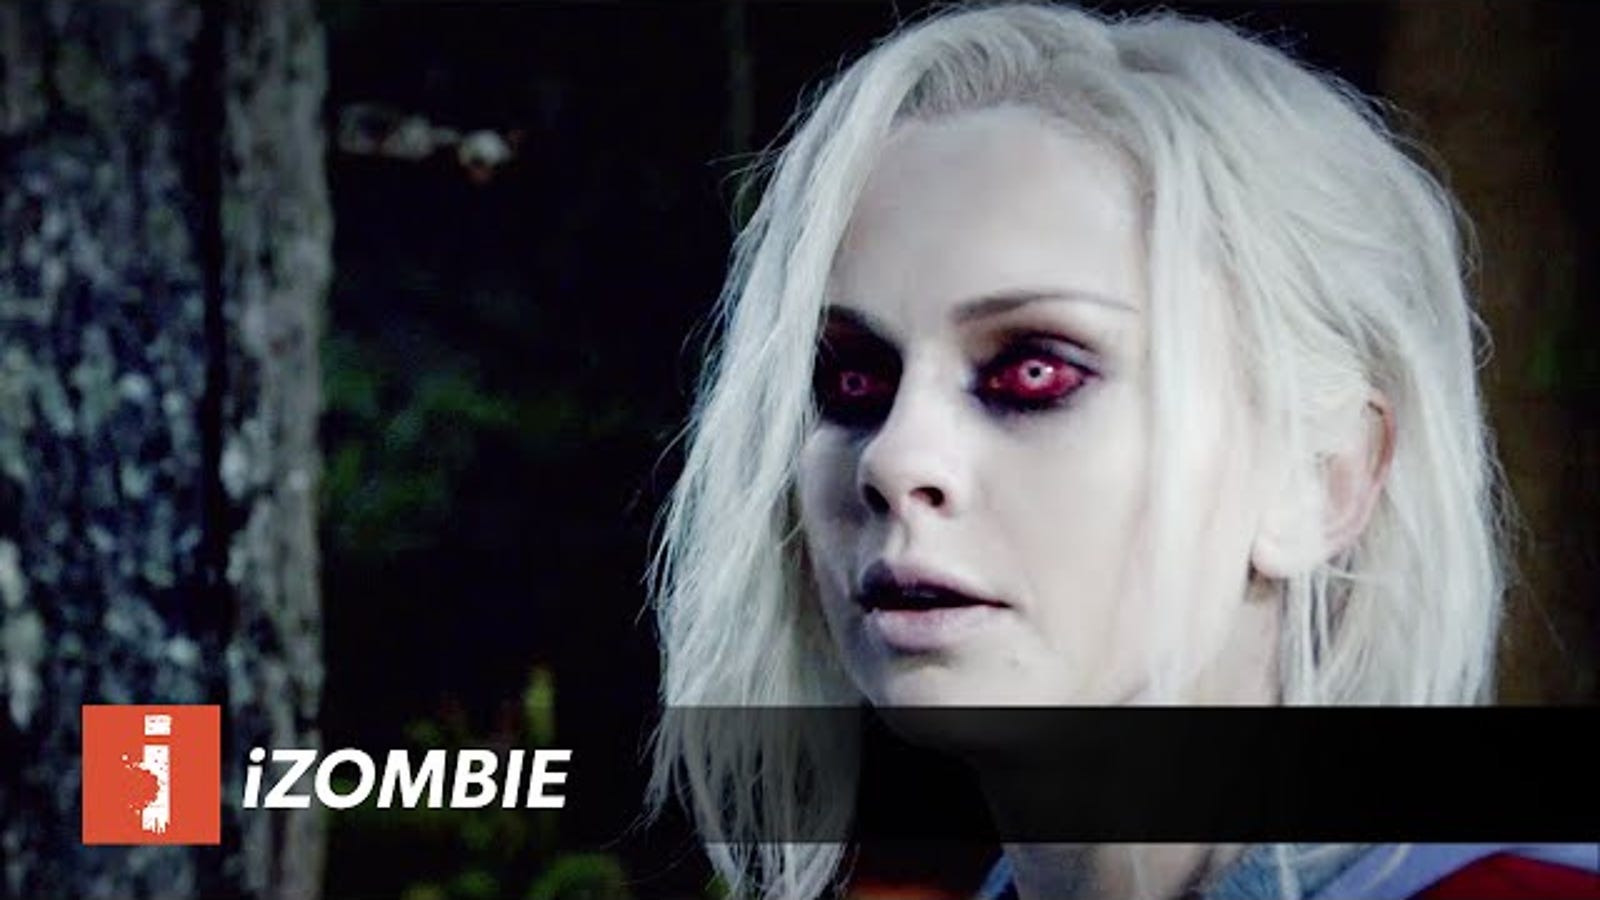 Izombie Trailer Explains What This Odd Undead Series Is All About 6869